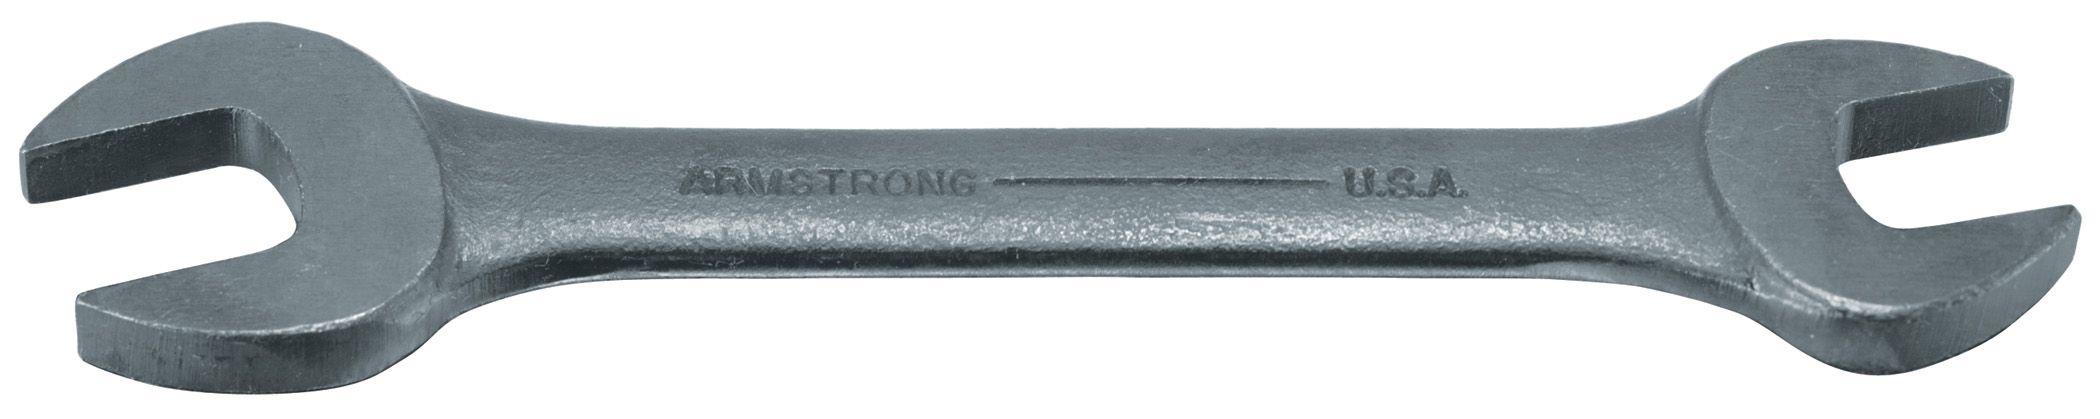 Armstrong 5/8 x 11/16 in. Black Oxide Open End Wrench